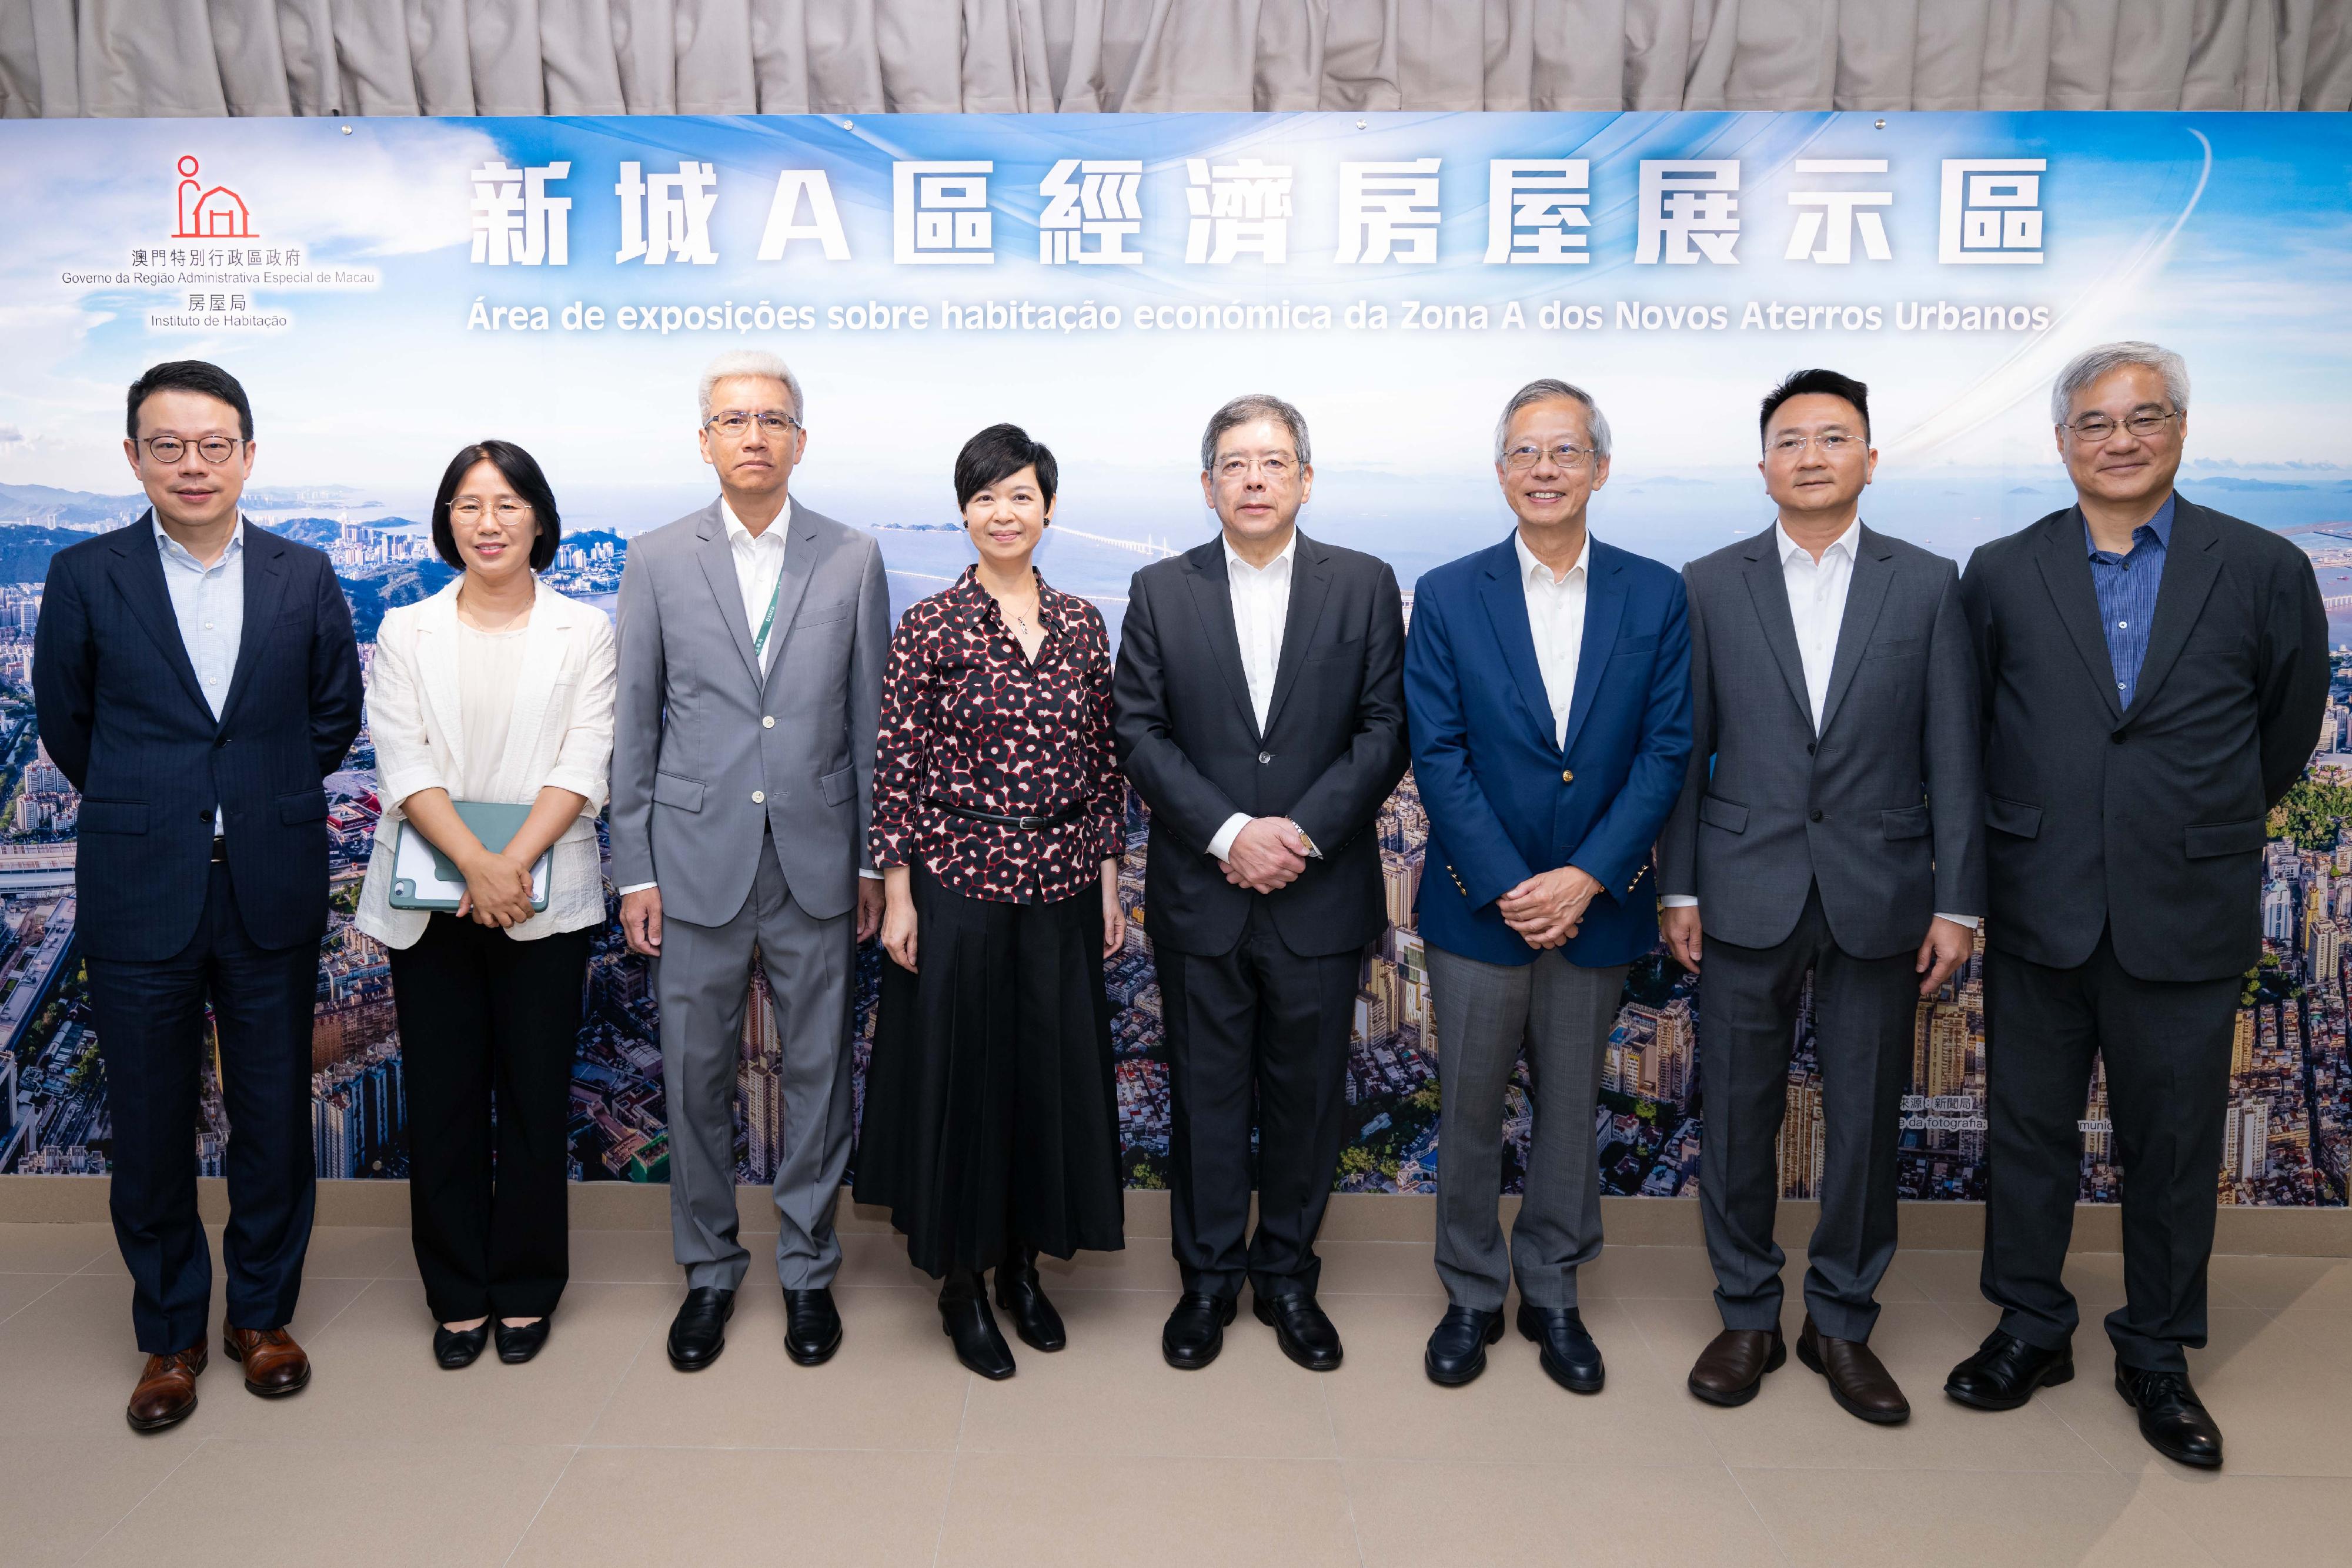 The Secretary for Housing, Ms Winnie Ho, visited Macao today (August 15) to exchange views with government officials of the Macao Special Administrative Region (SAR) on public housing system and policies, overall planning of Macao and progress of public works projects, as well as inspecting housing and urban development projects in Macao. Photo shows Ms Ho (fourth left); the Secretary for Transport and Public Works of the Macao SAR, Mr Raimundo Arrais do Rosário (fourth right); the Chairman of the Hong Kong Housing Society (HKHS), Mr Walter Chan (third right); the Vice-Chairman of the HKHS, Professor Ling Kar-kan (first right); and the Chief Executive Officer and Executive Director of the HKHS, Mr James Chan (first left).
 
